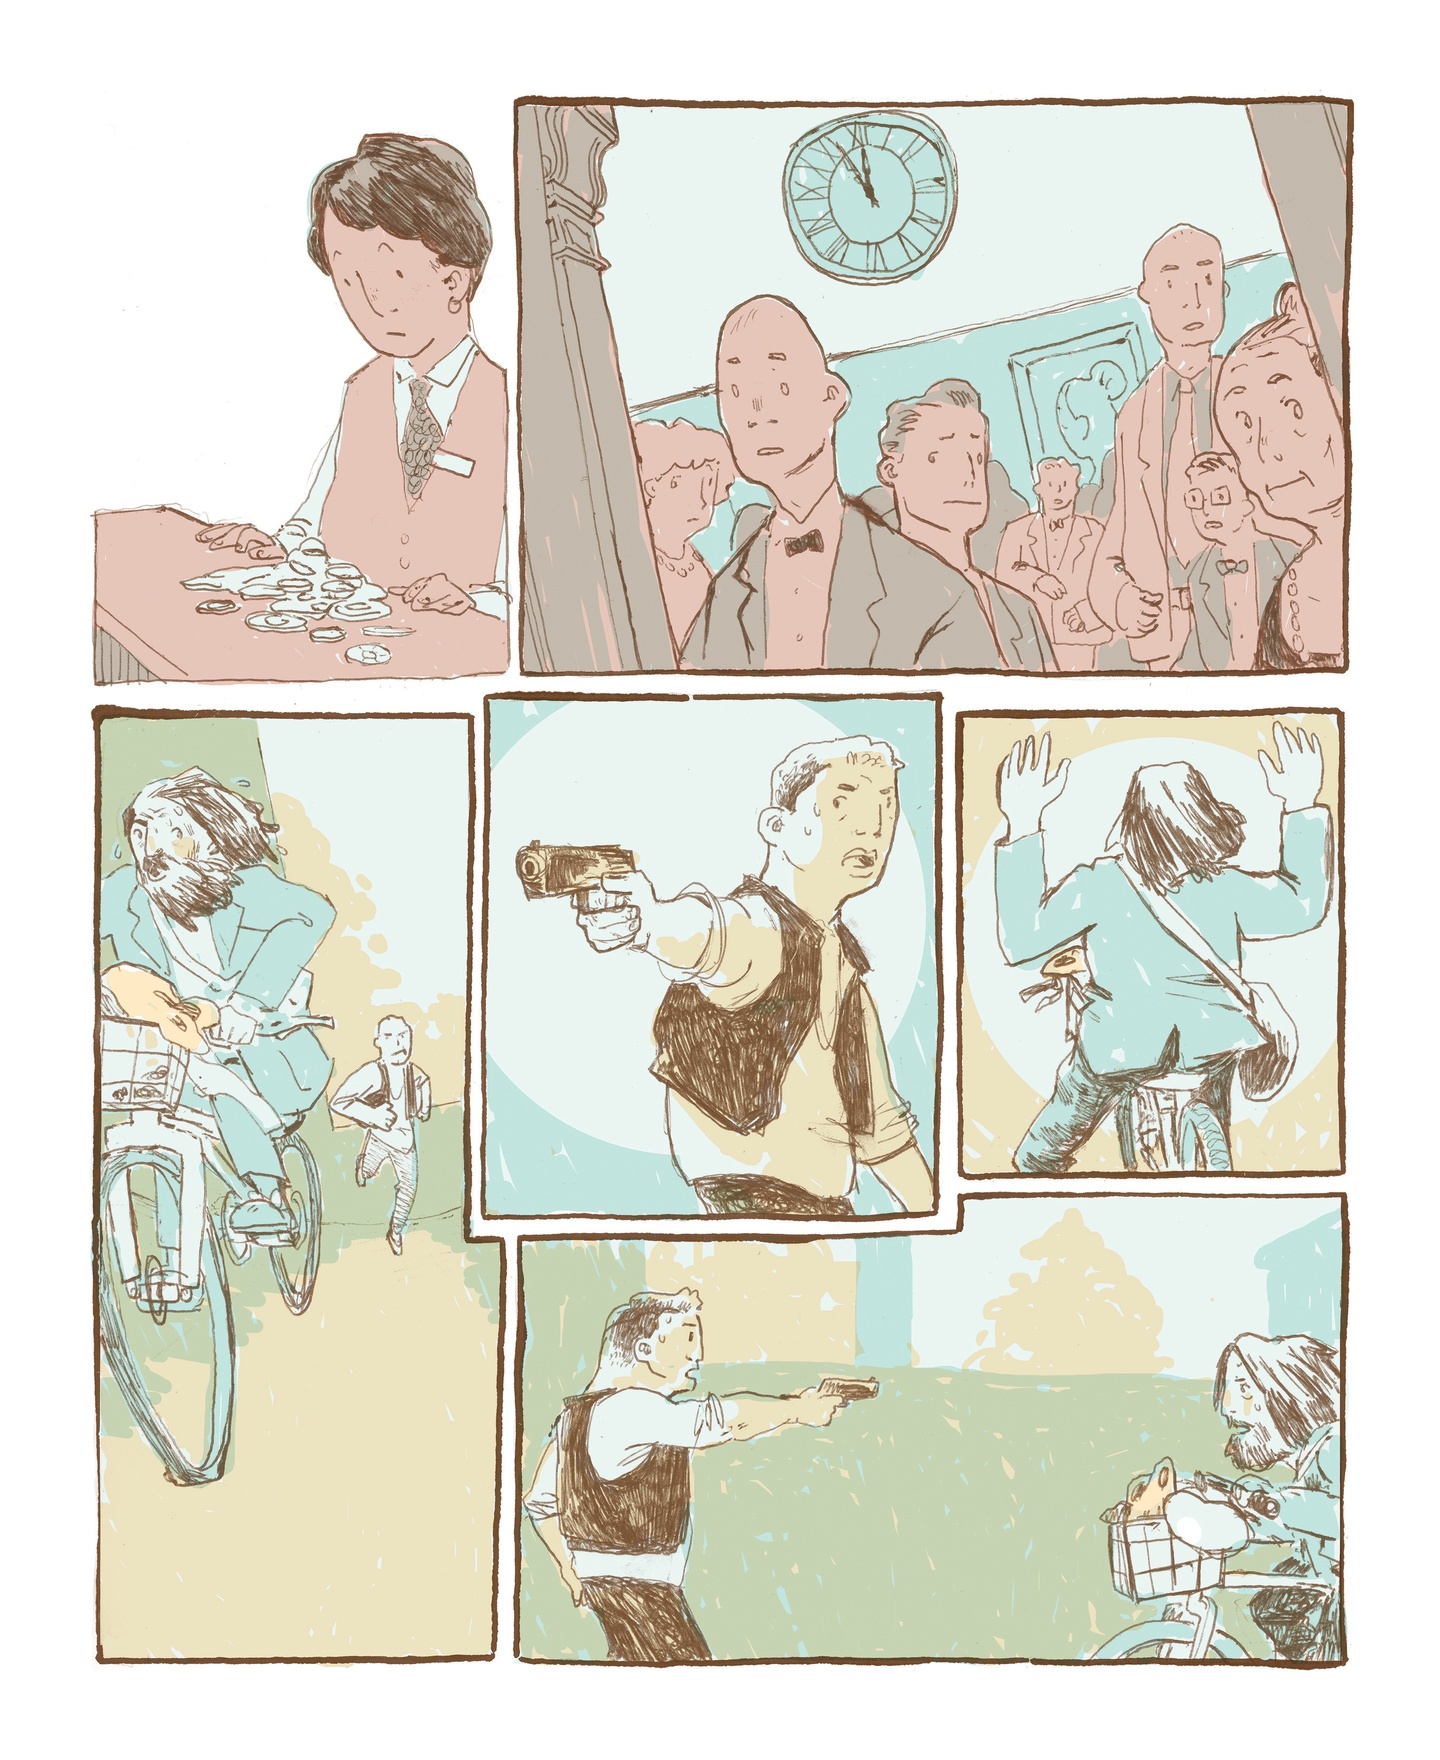 Comic page - two panels of people in a bank, four panels of a person in a vest holding up a bicyclist with a gun.